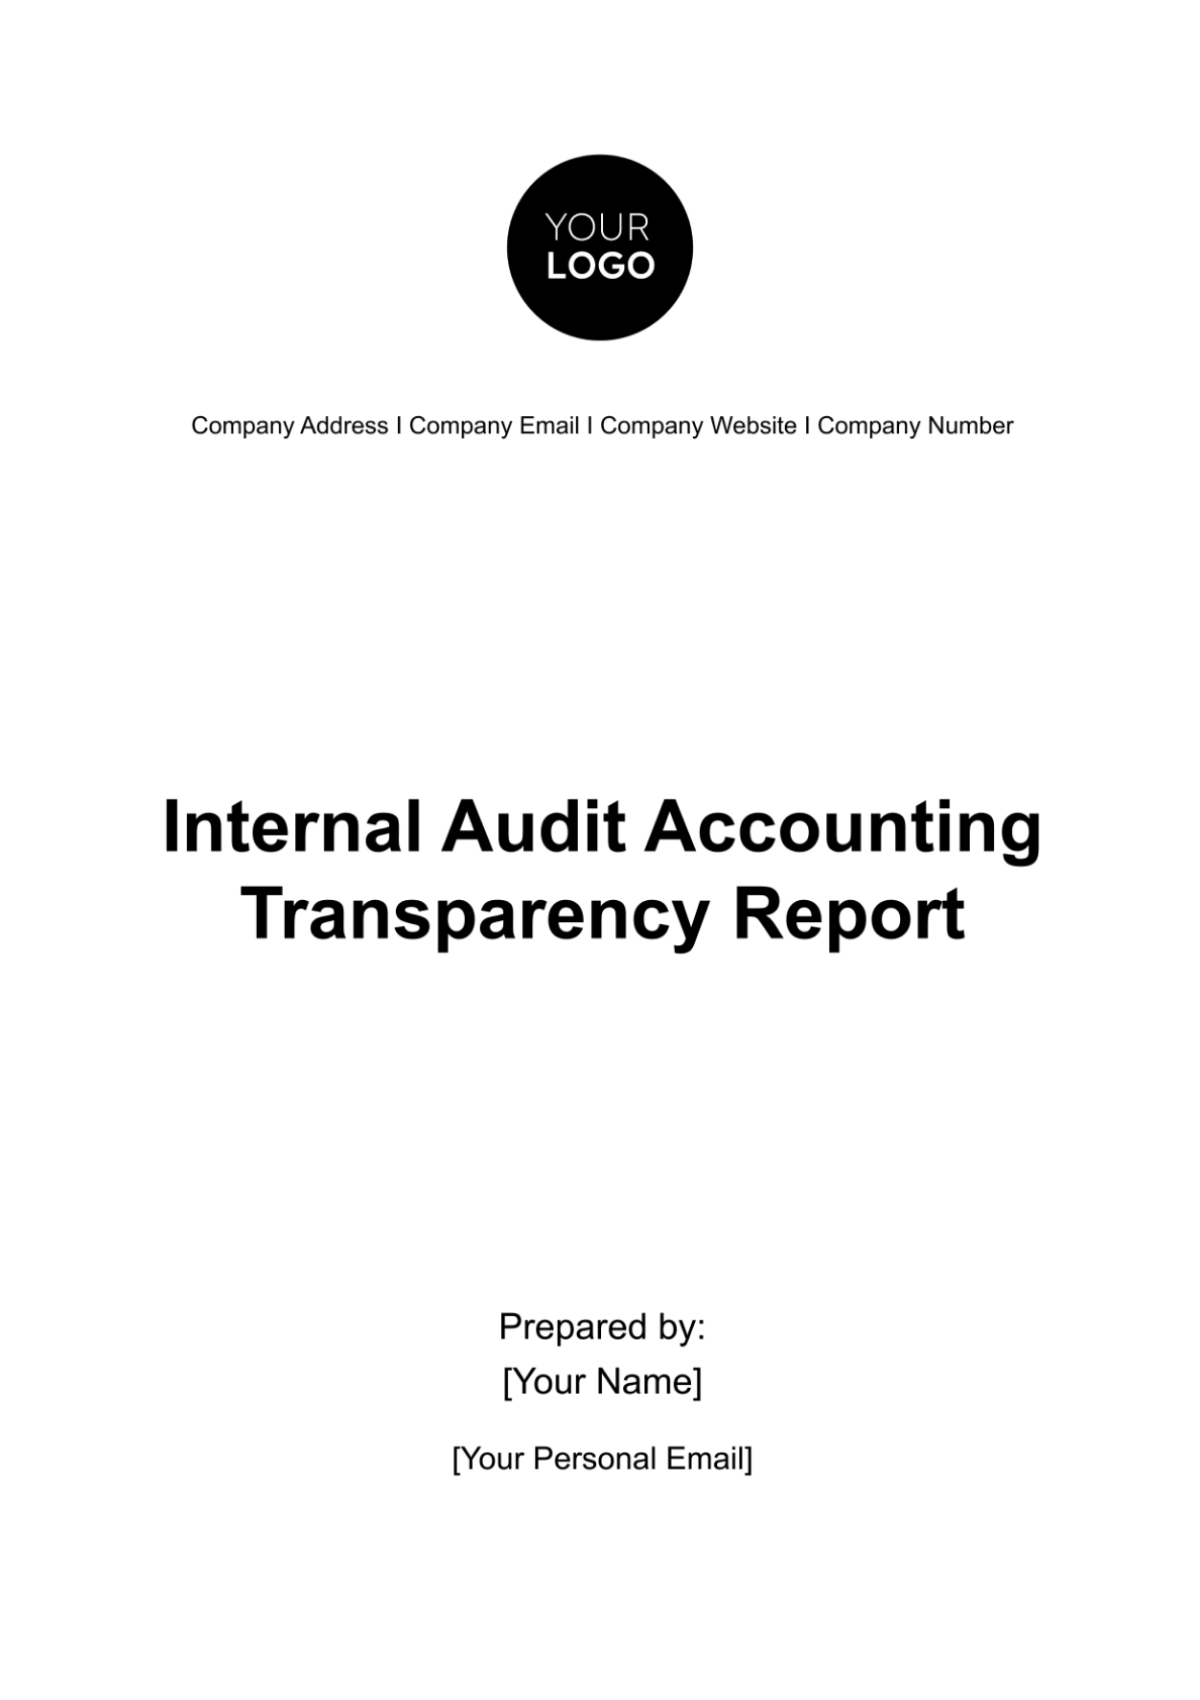 Free Internal Audit Accounting Transparency Report Template